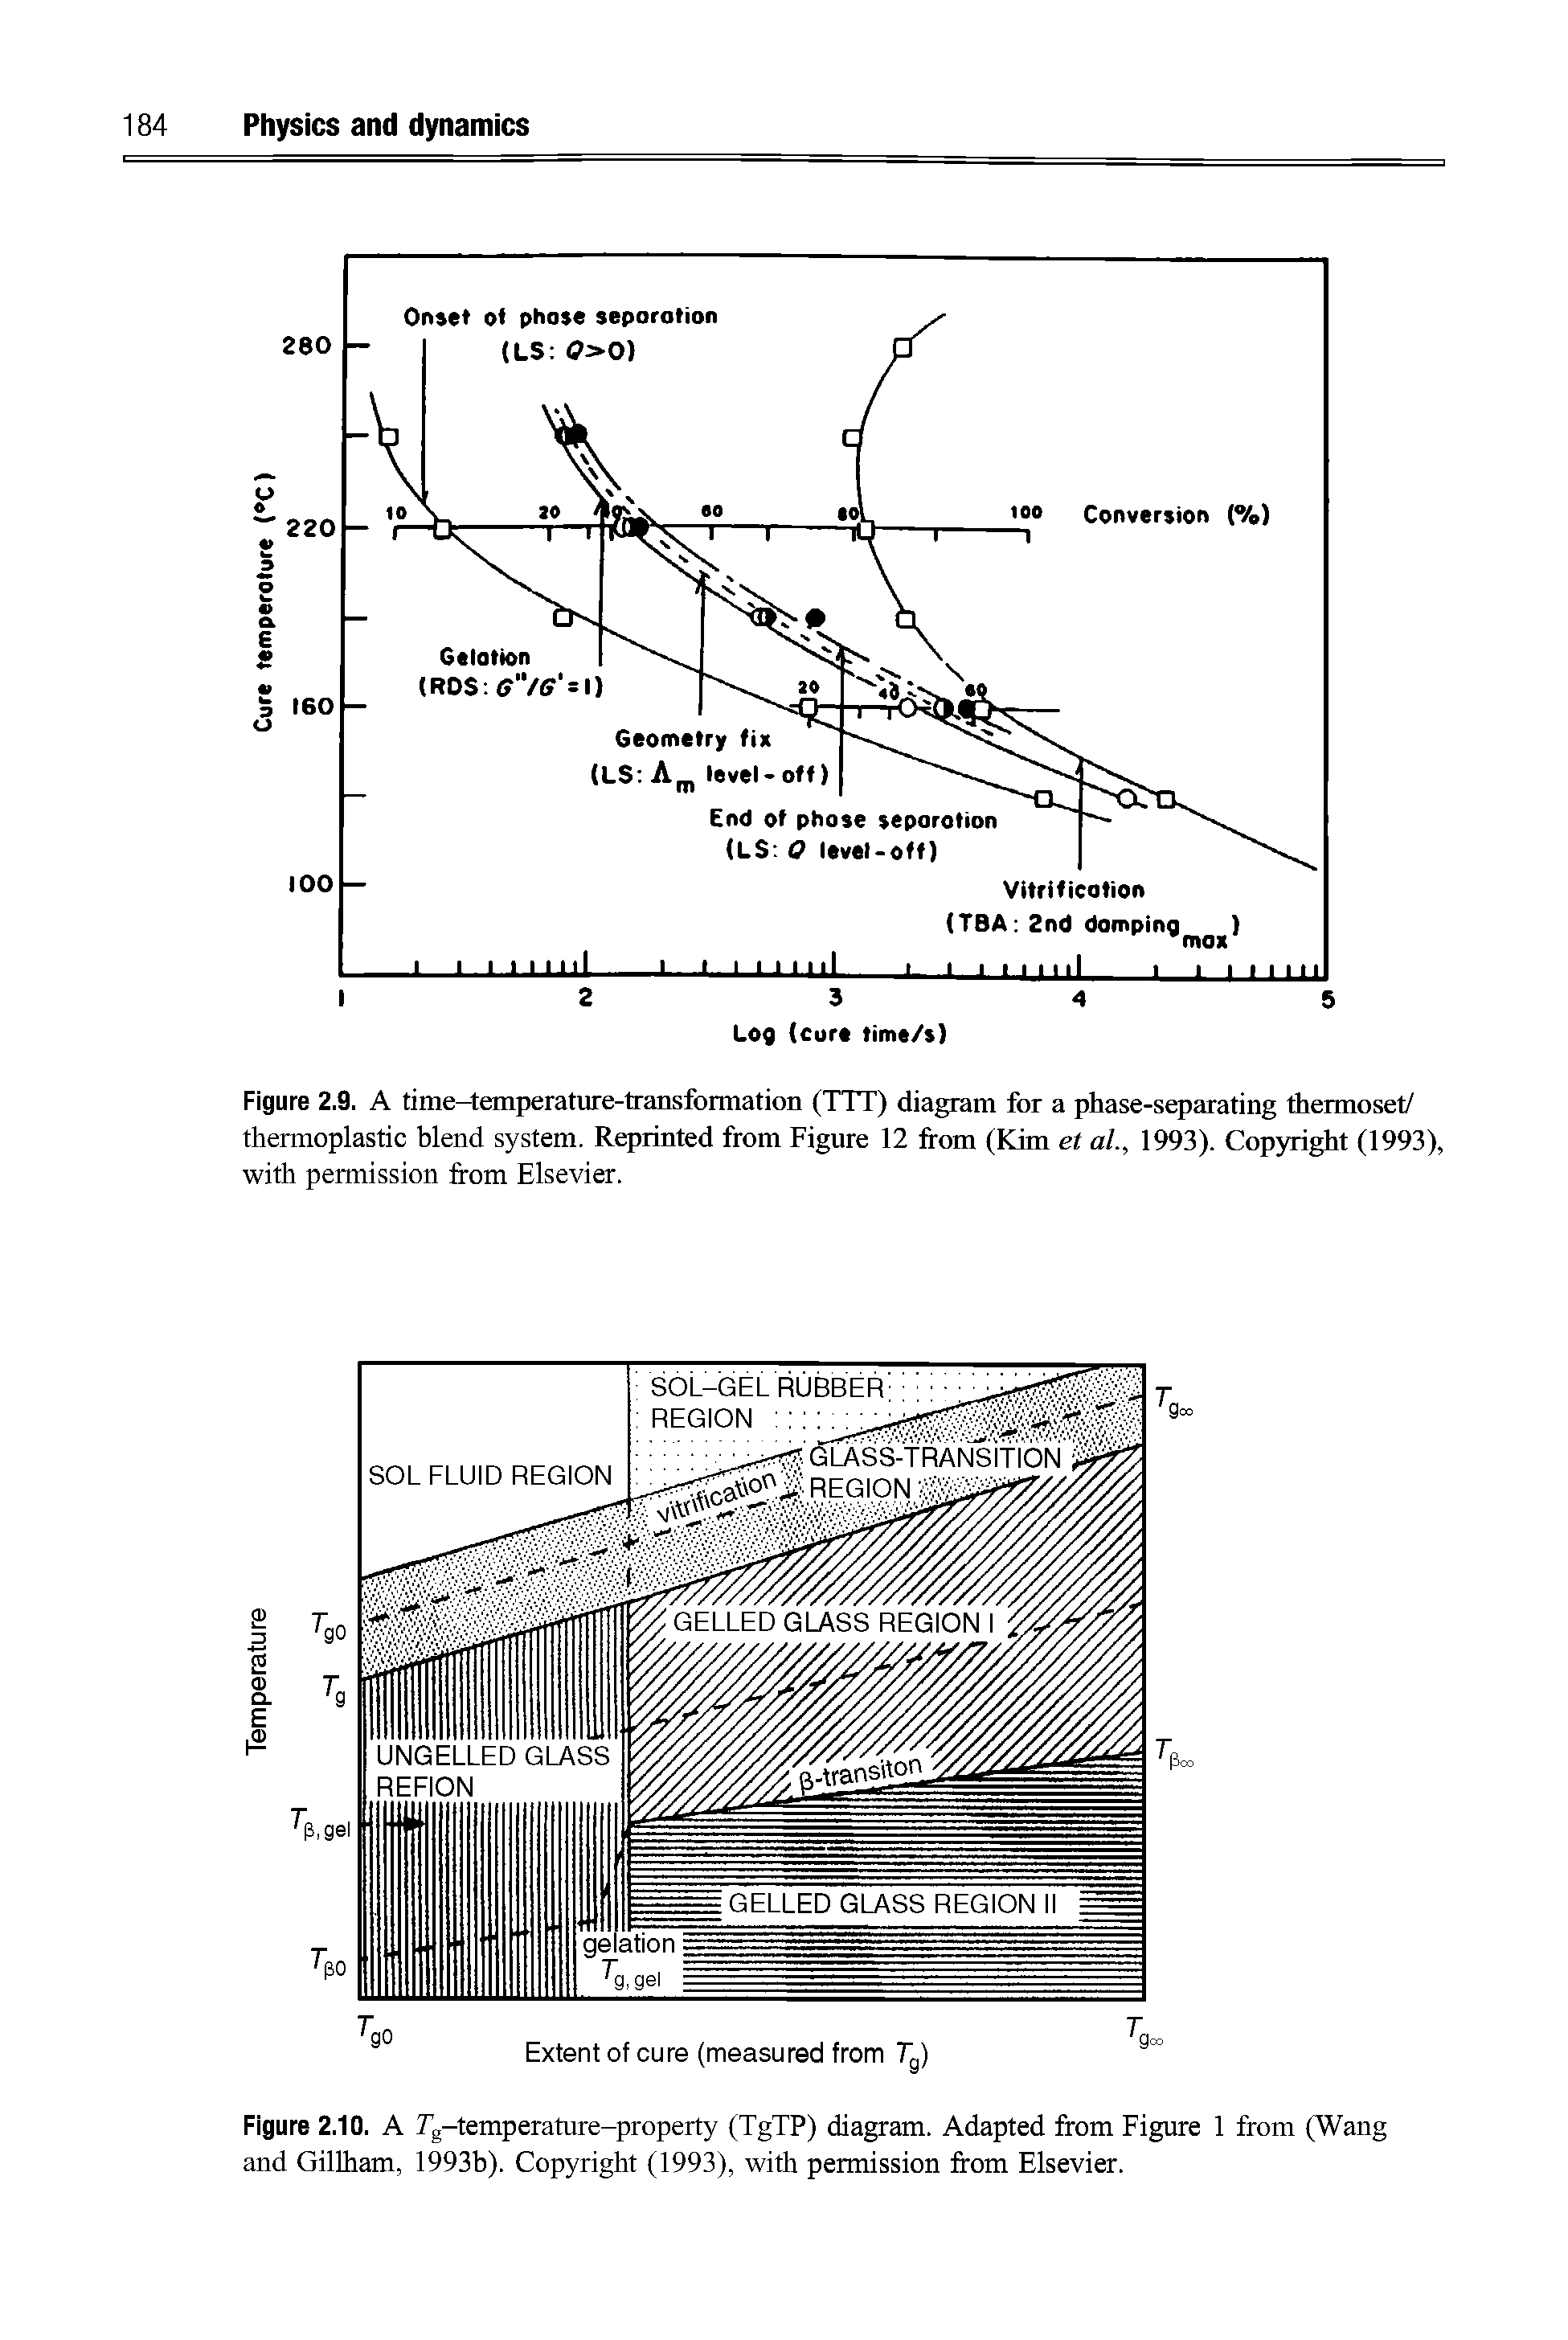 Figure 2.9. A time-temperature-transformation (TTT) diagram for a phase-separating thermoset/ thermoplastic blend system. Reprinted from Figure 12 from (Kim et al., 1993). Copyright (1993), with permission from Elsevier.